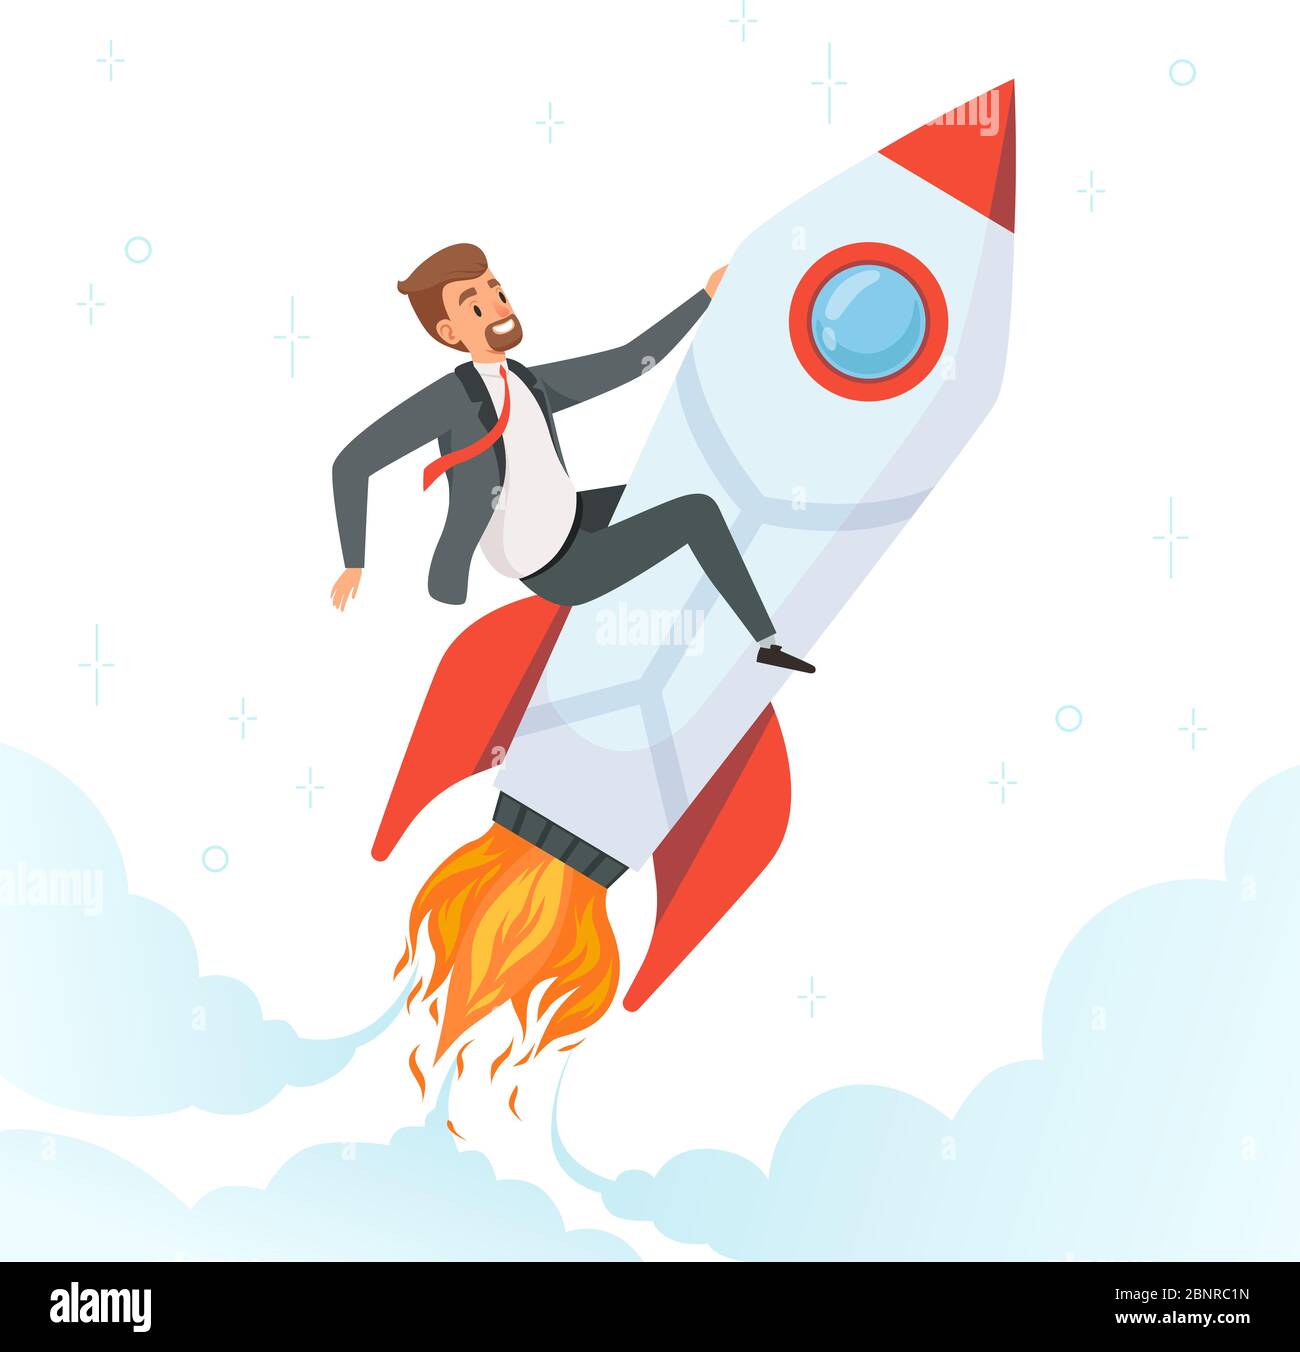 Businessman on rocket. Concept of launch startup new project of dream fly people on shuttle business product idea vector character Stock Vector